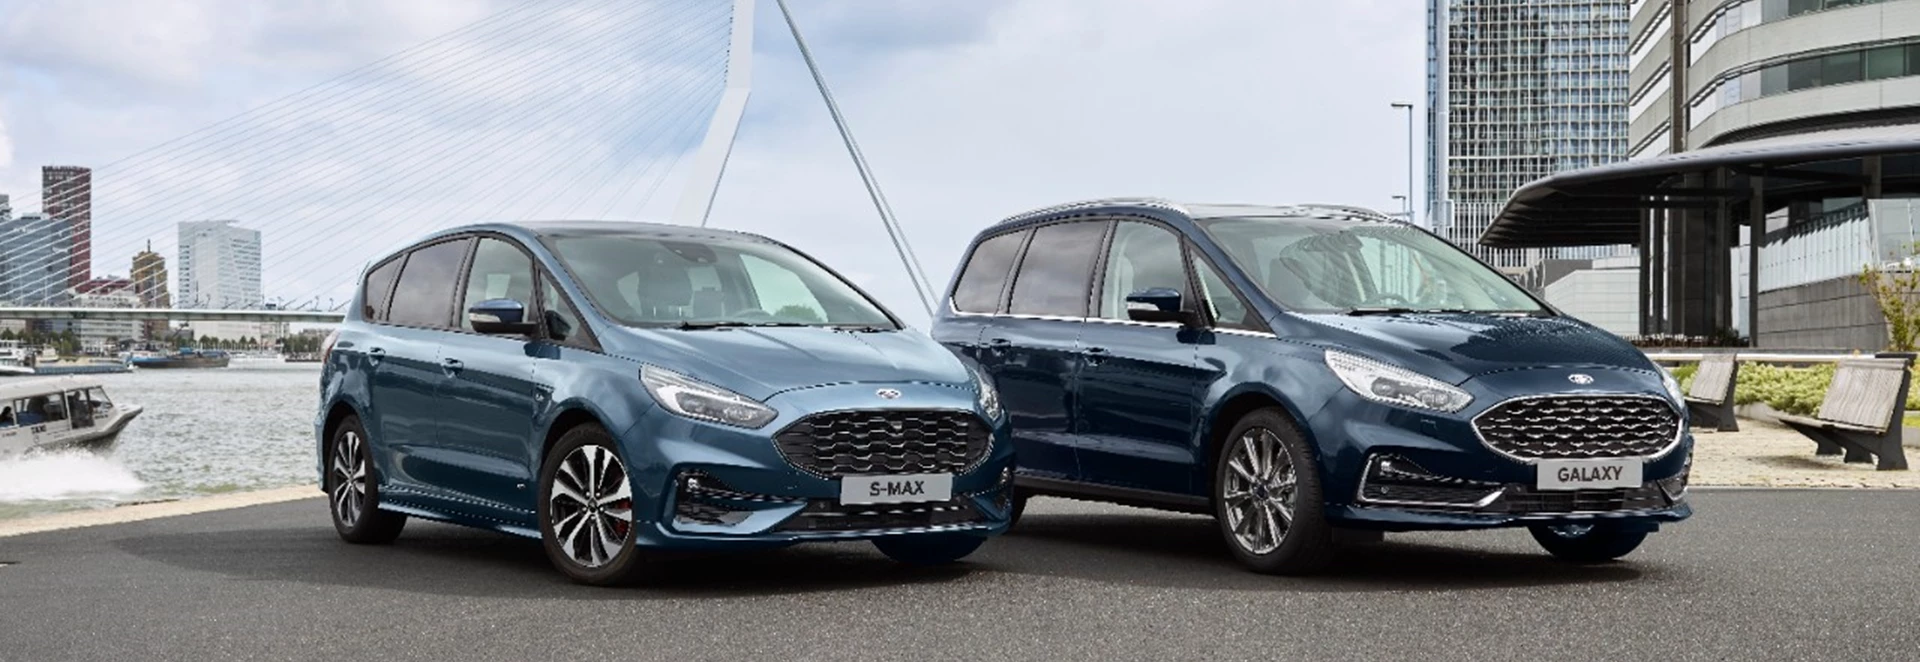 Ford S-MAX and Ford Galaxy MPVs are going hybrid 